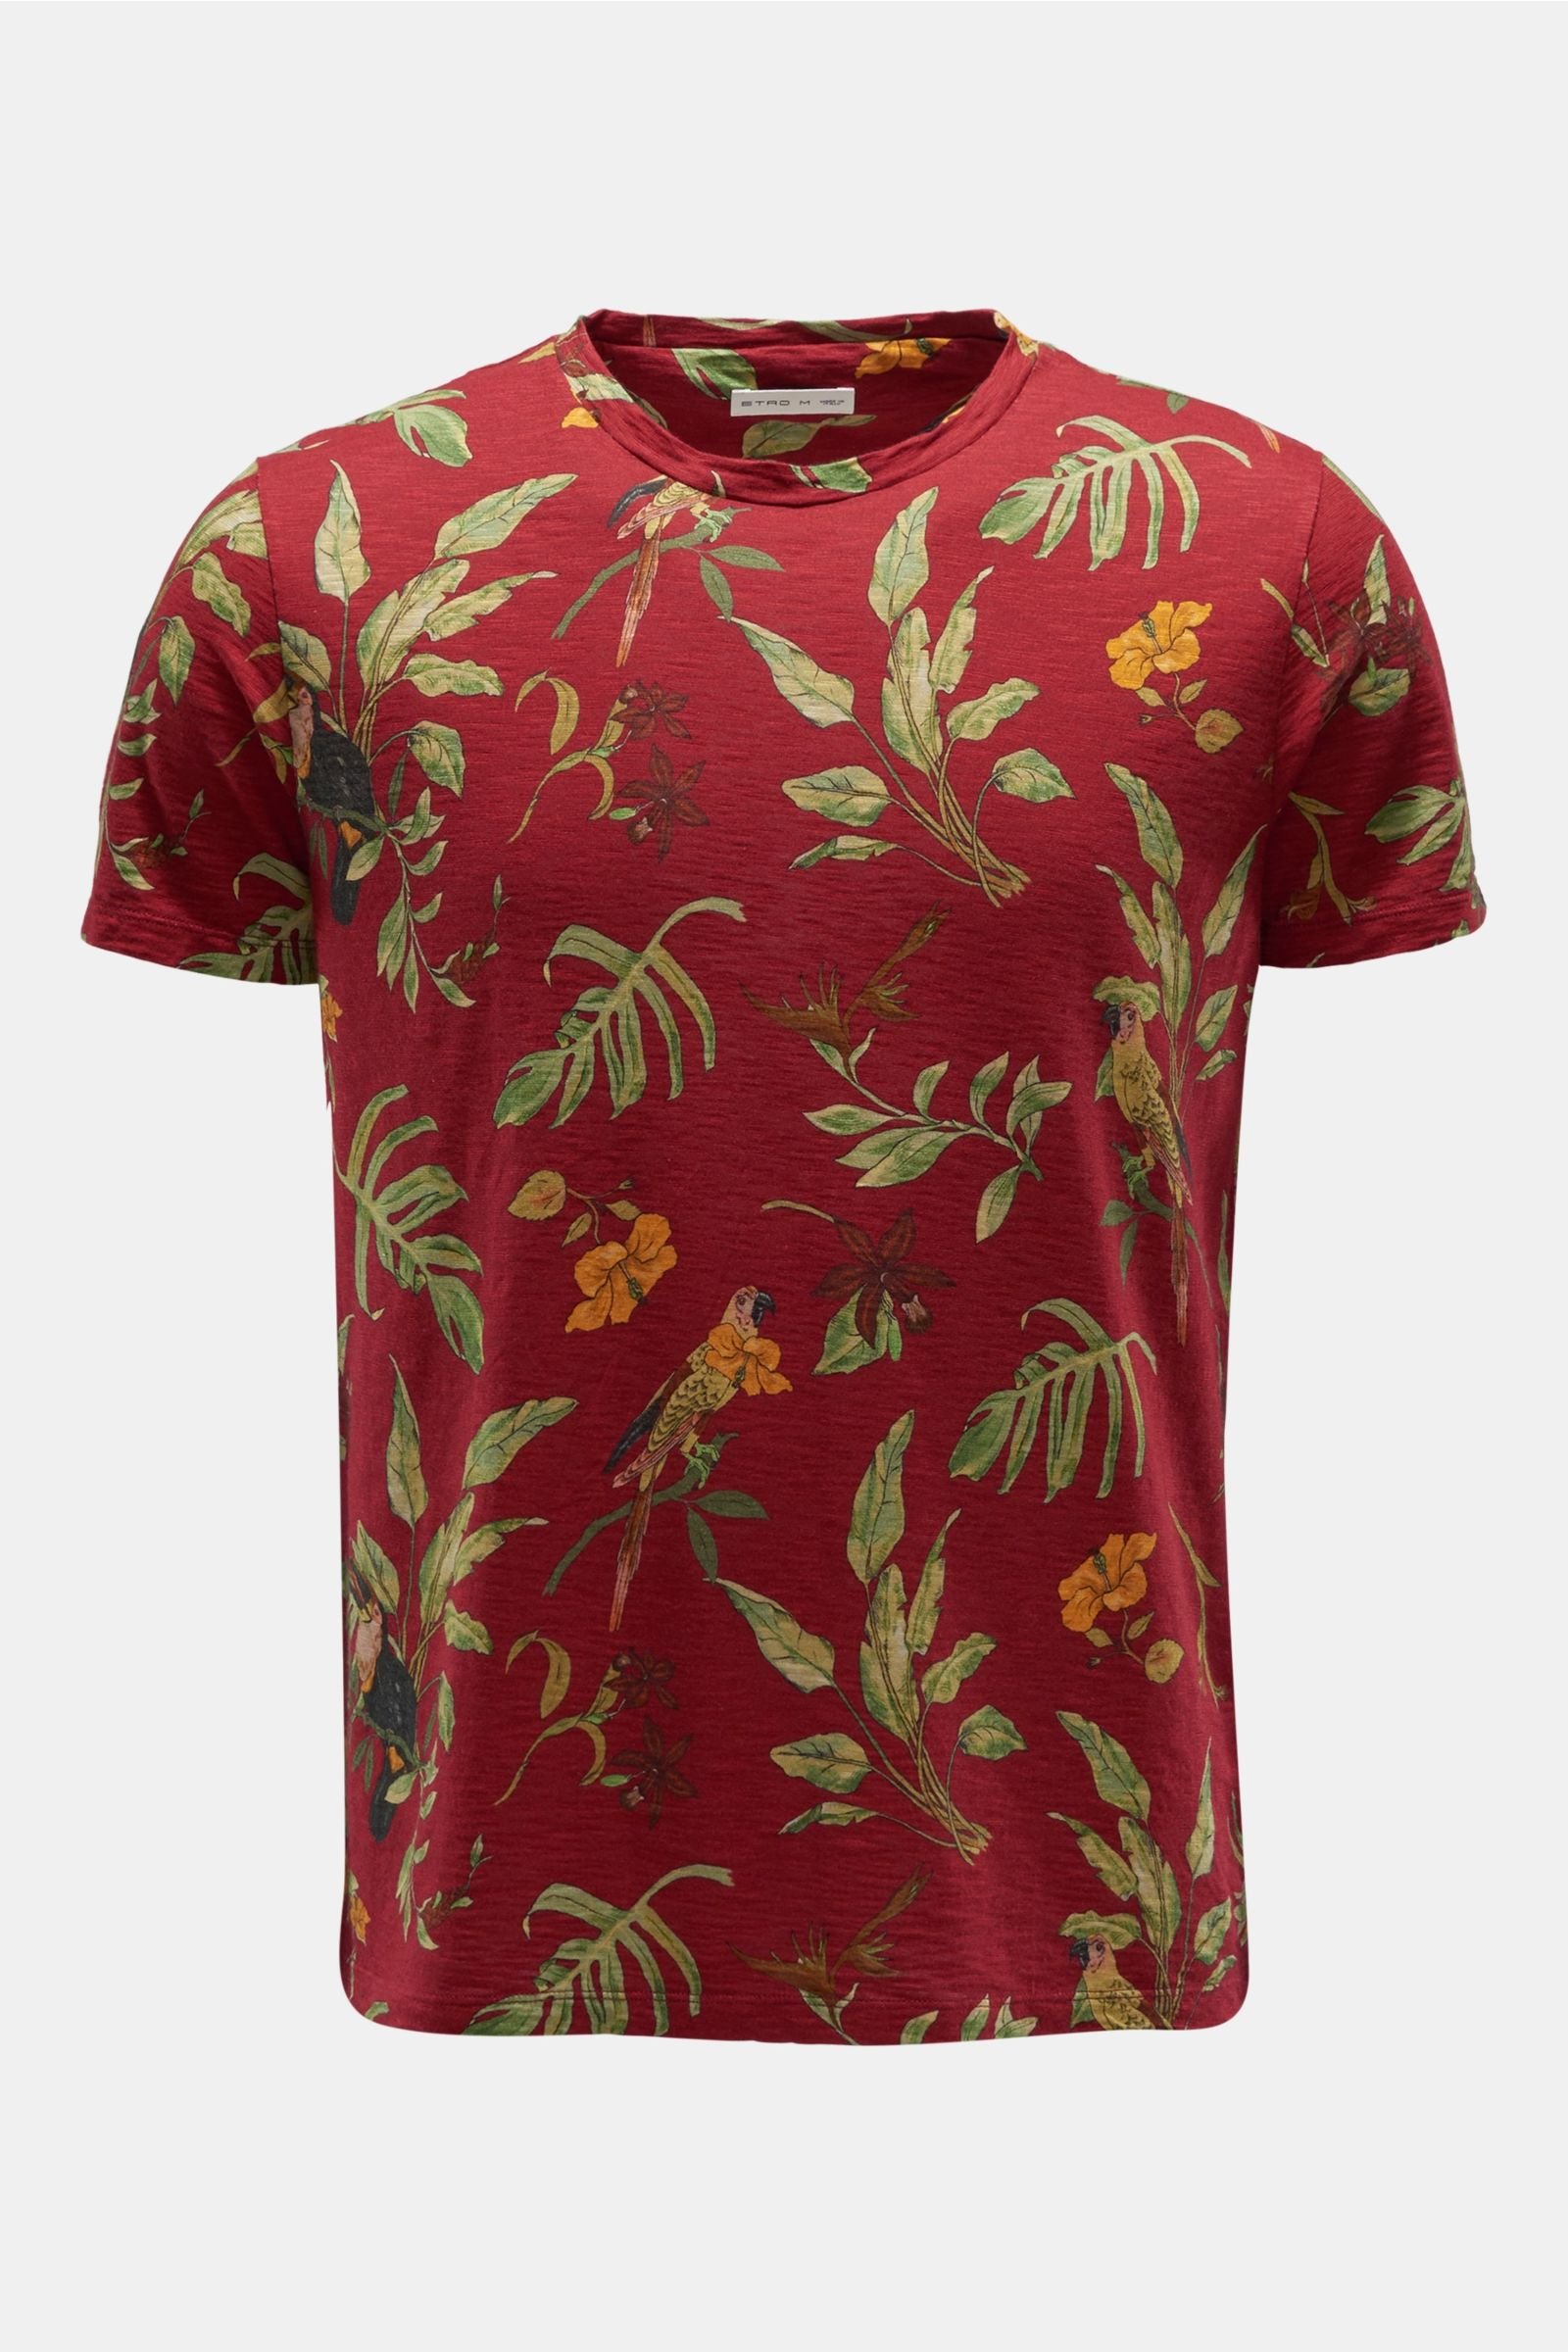 Crew neck T-shirt dark red patterned